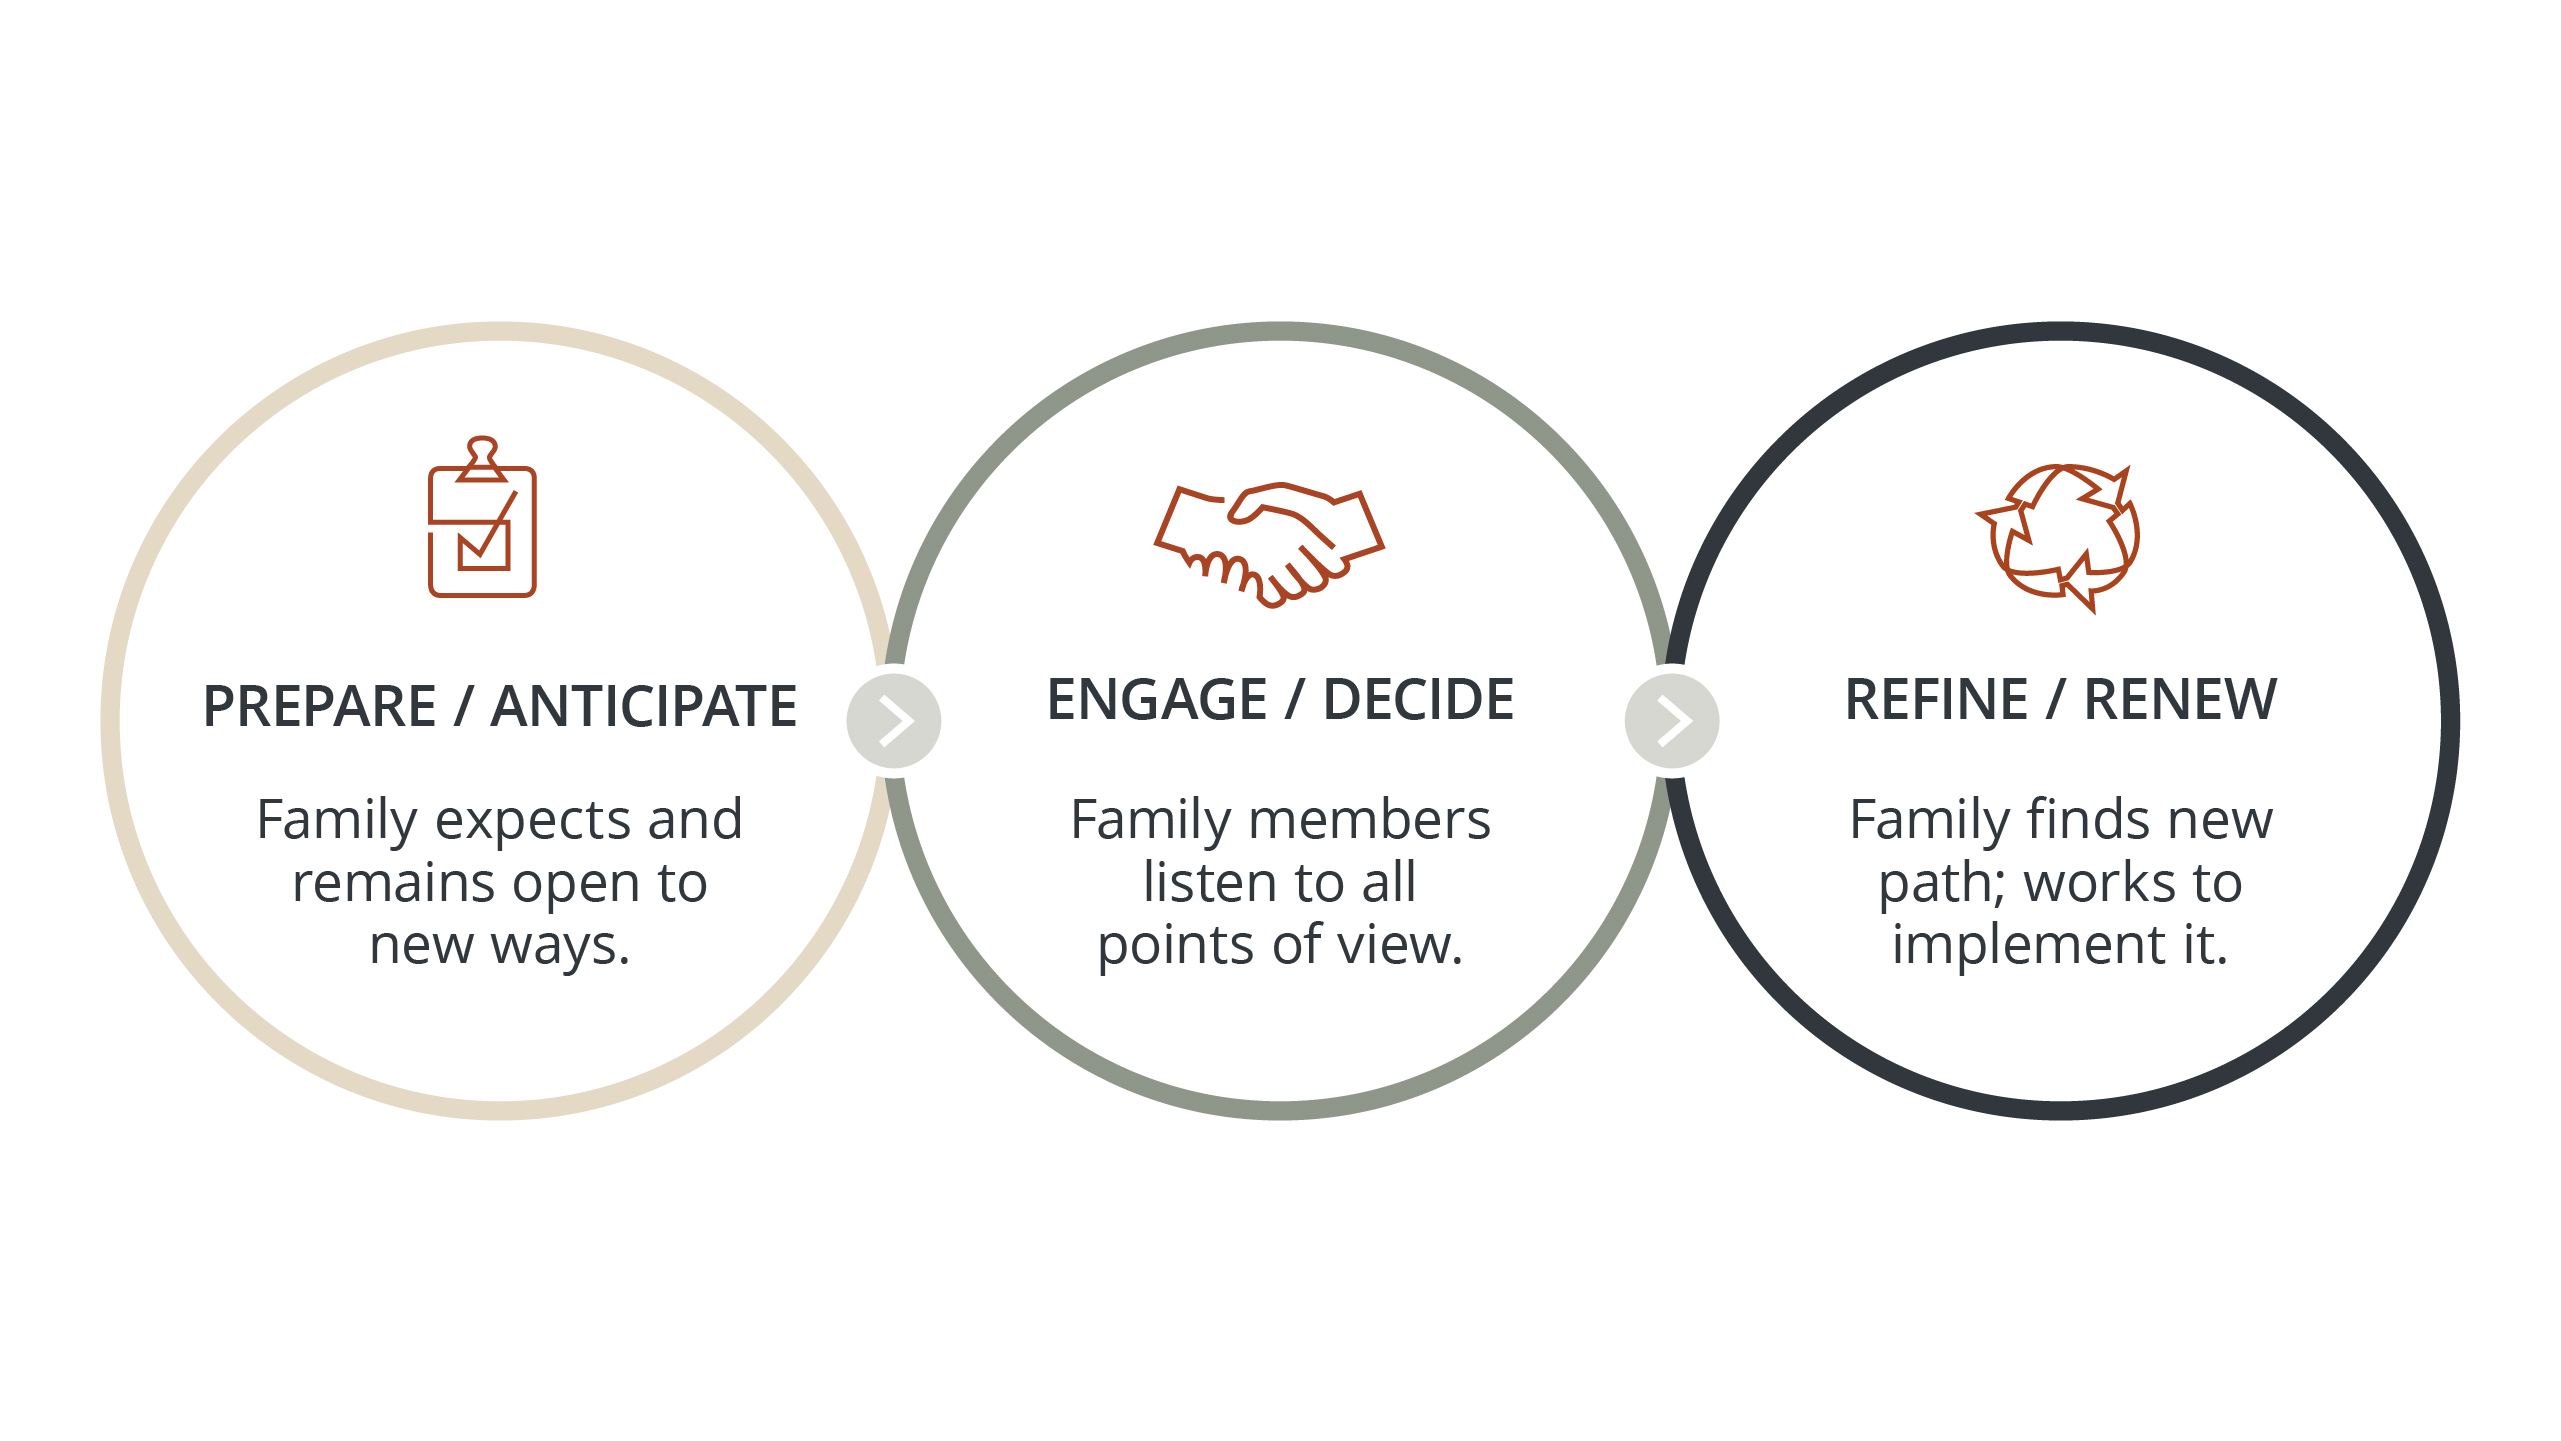 Graphic shows the three-phase cycle of resilience, noting how generative families respond to change.